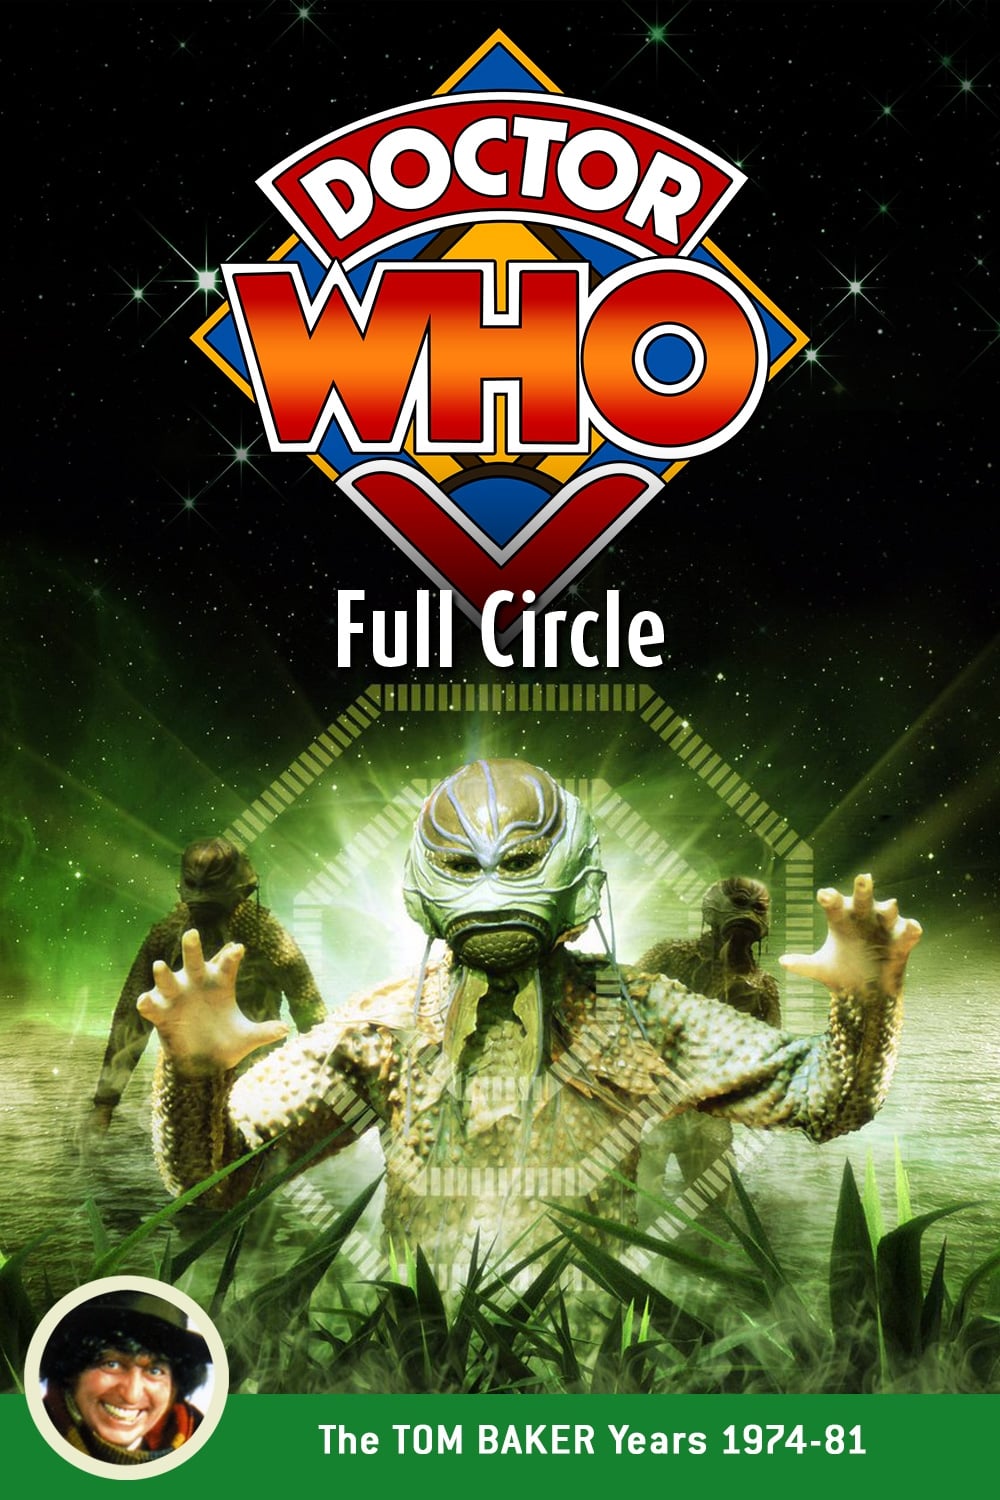 Doctor Who: Full Circle (1980)